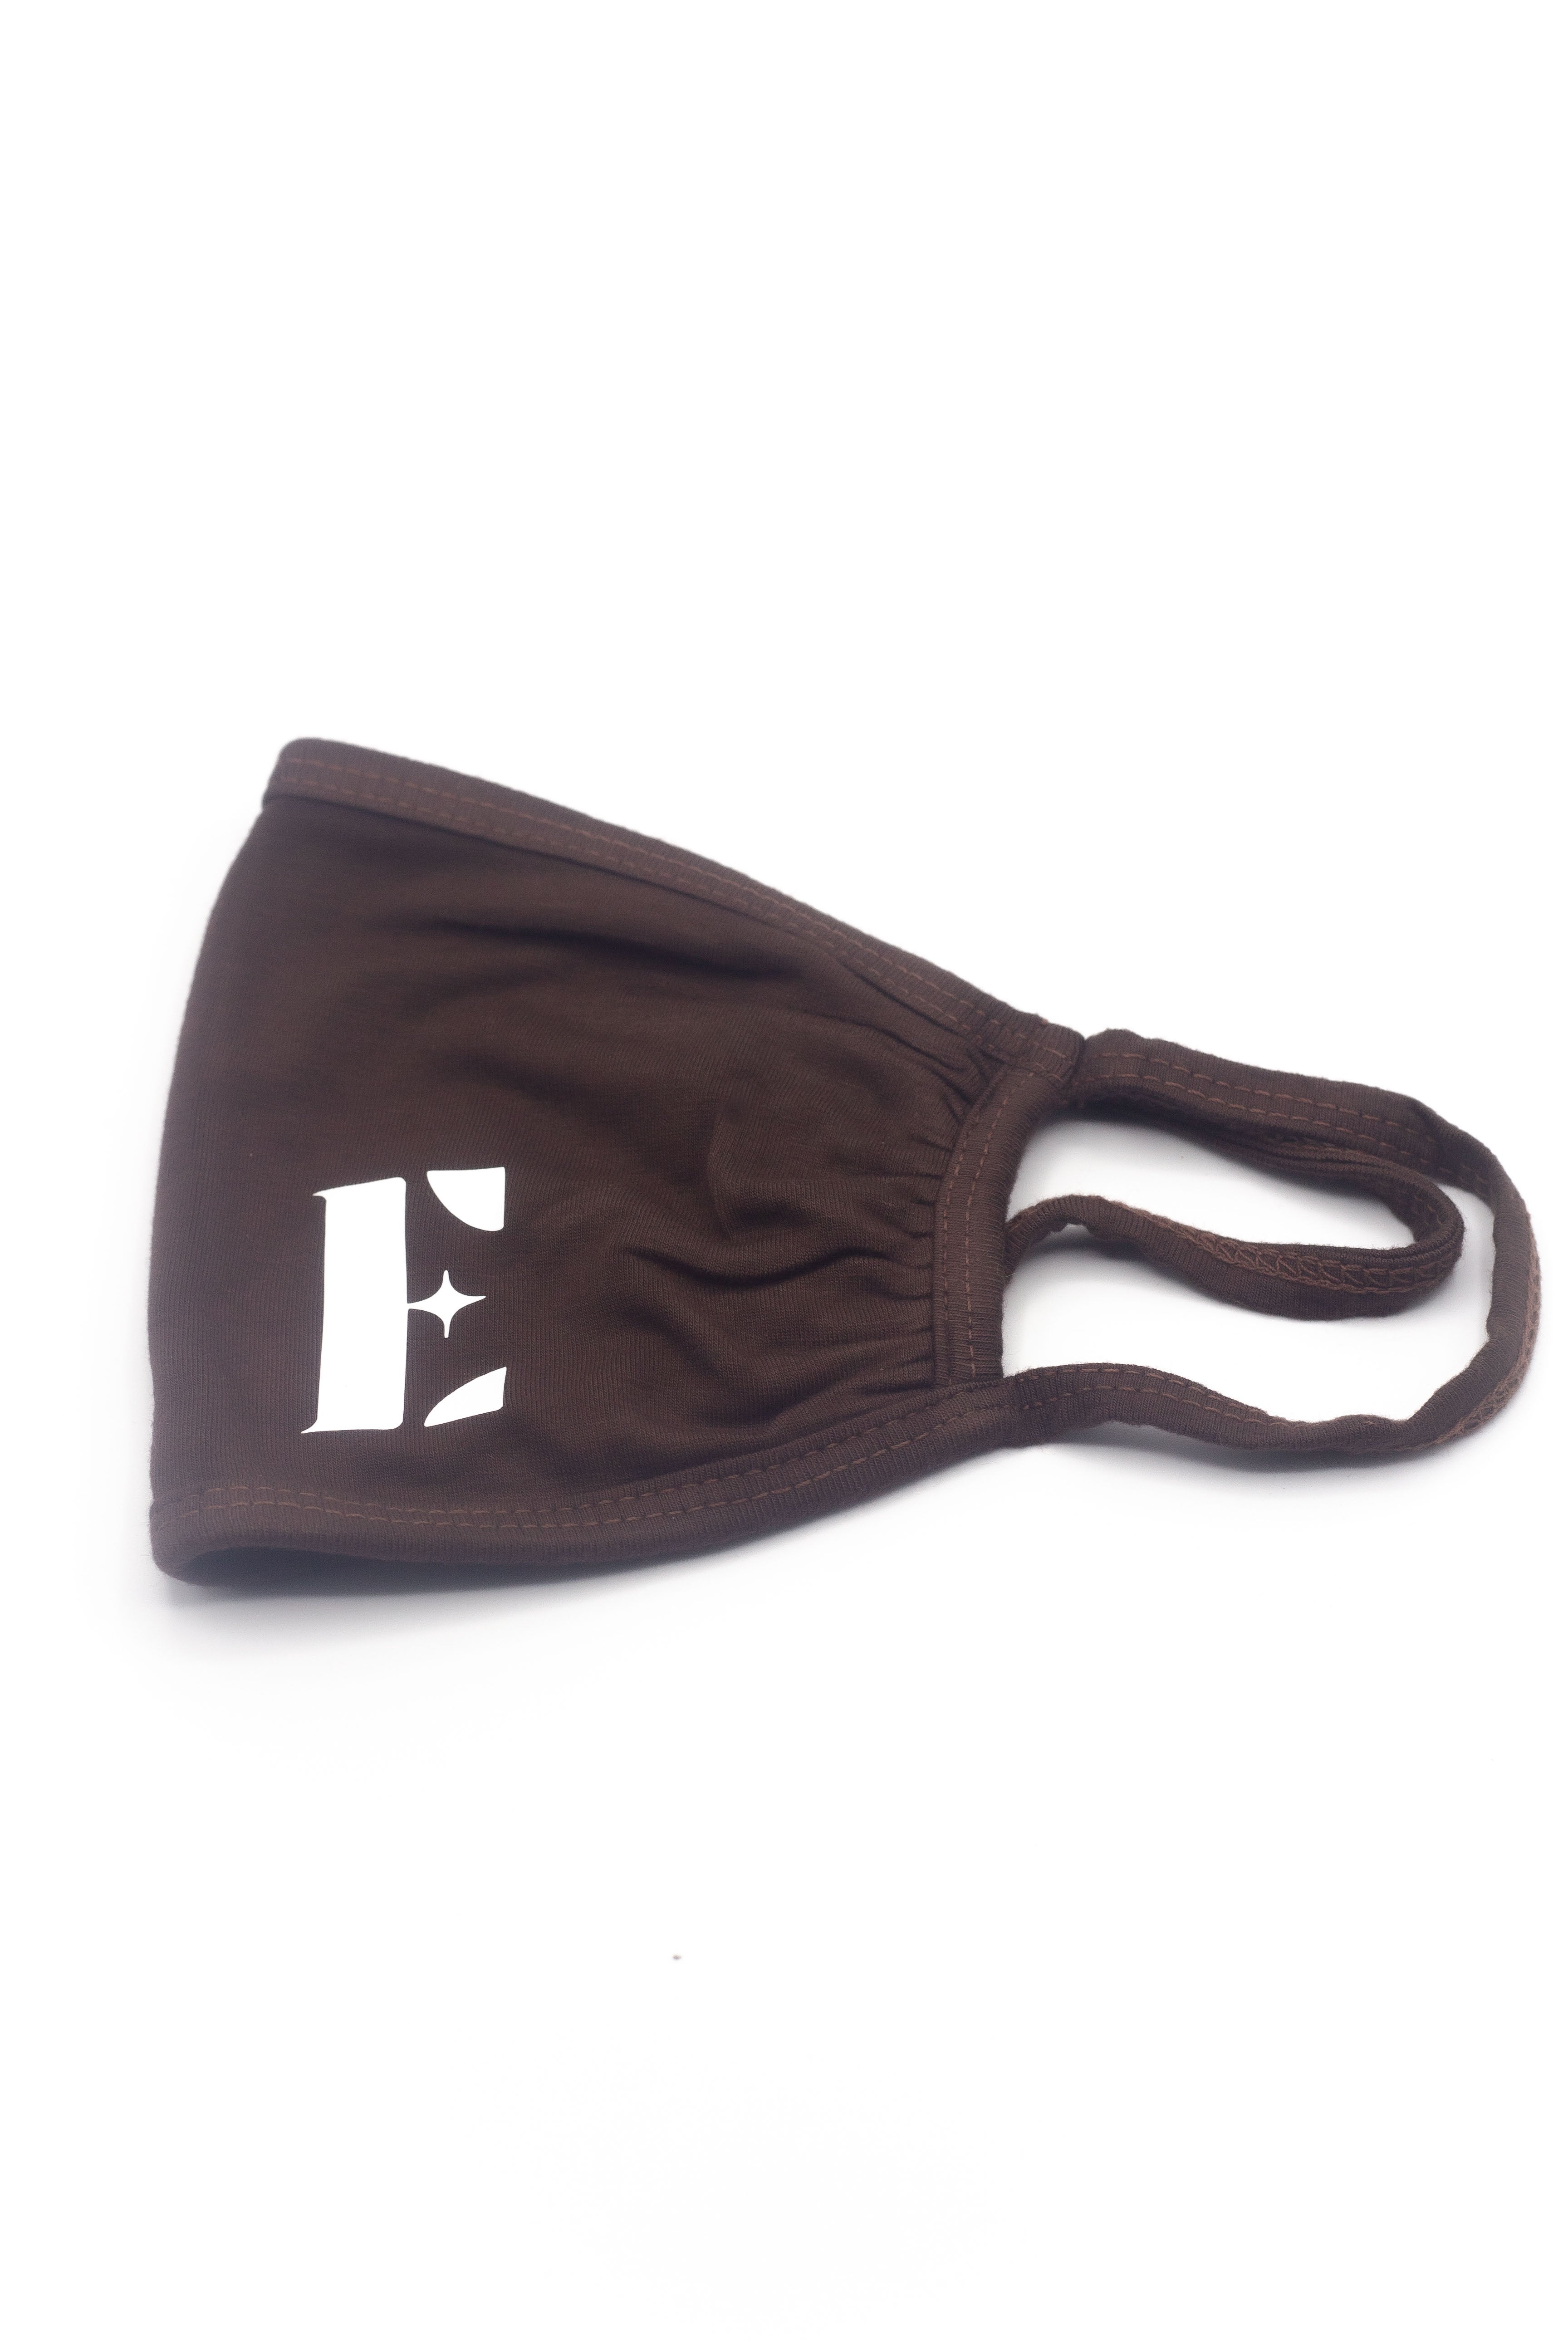 Dark brown E's Element reusable face mask. The face mask is imprinted with the E's Element logo on the bottom left in white. Chocolate Face Mask by E's Element.